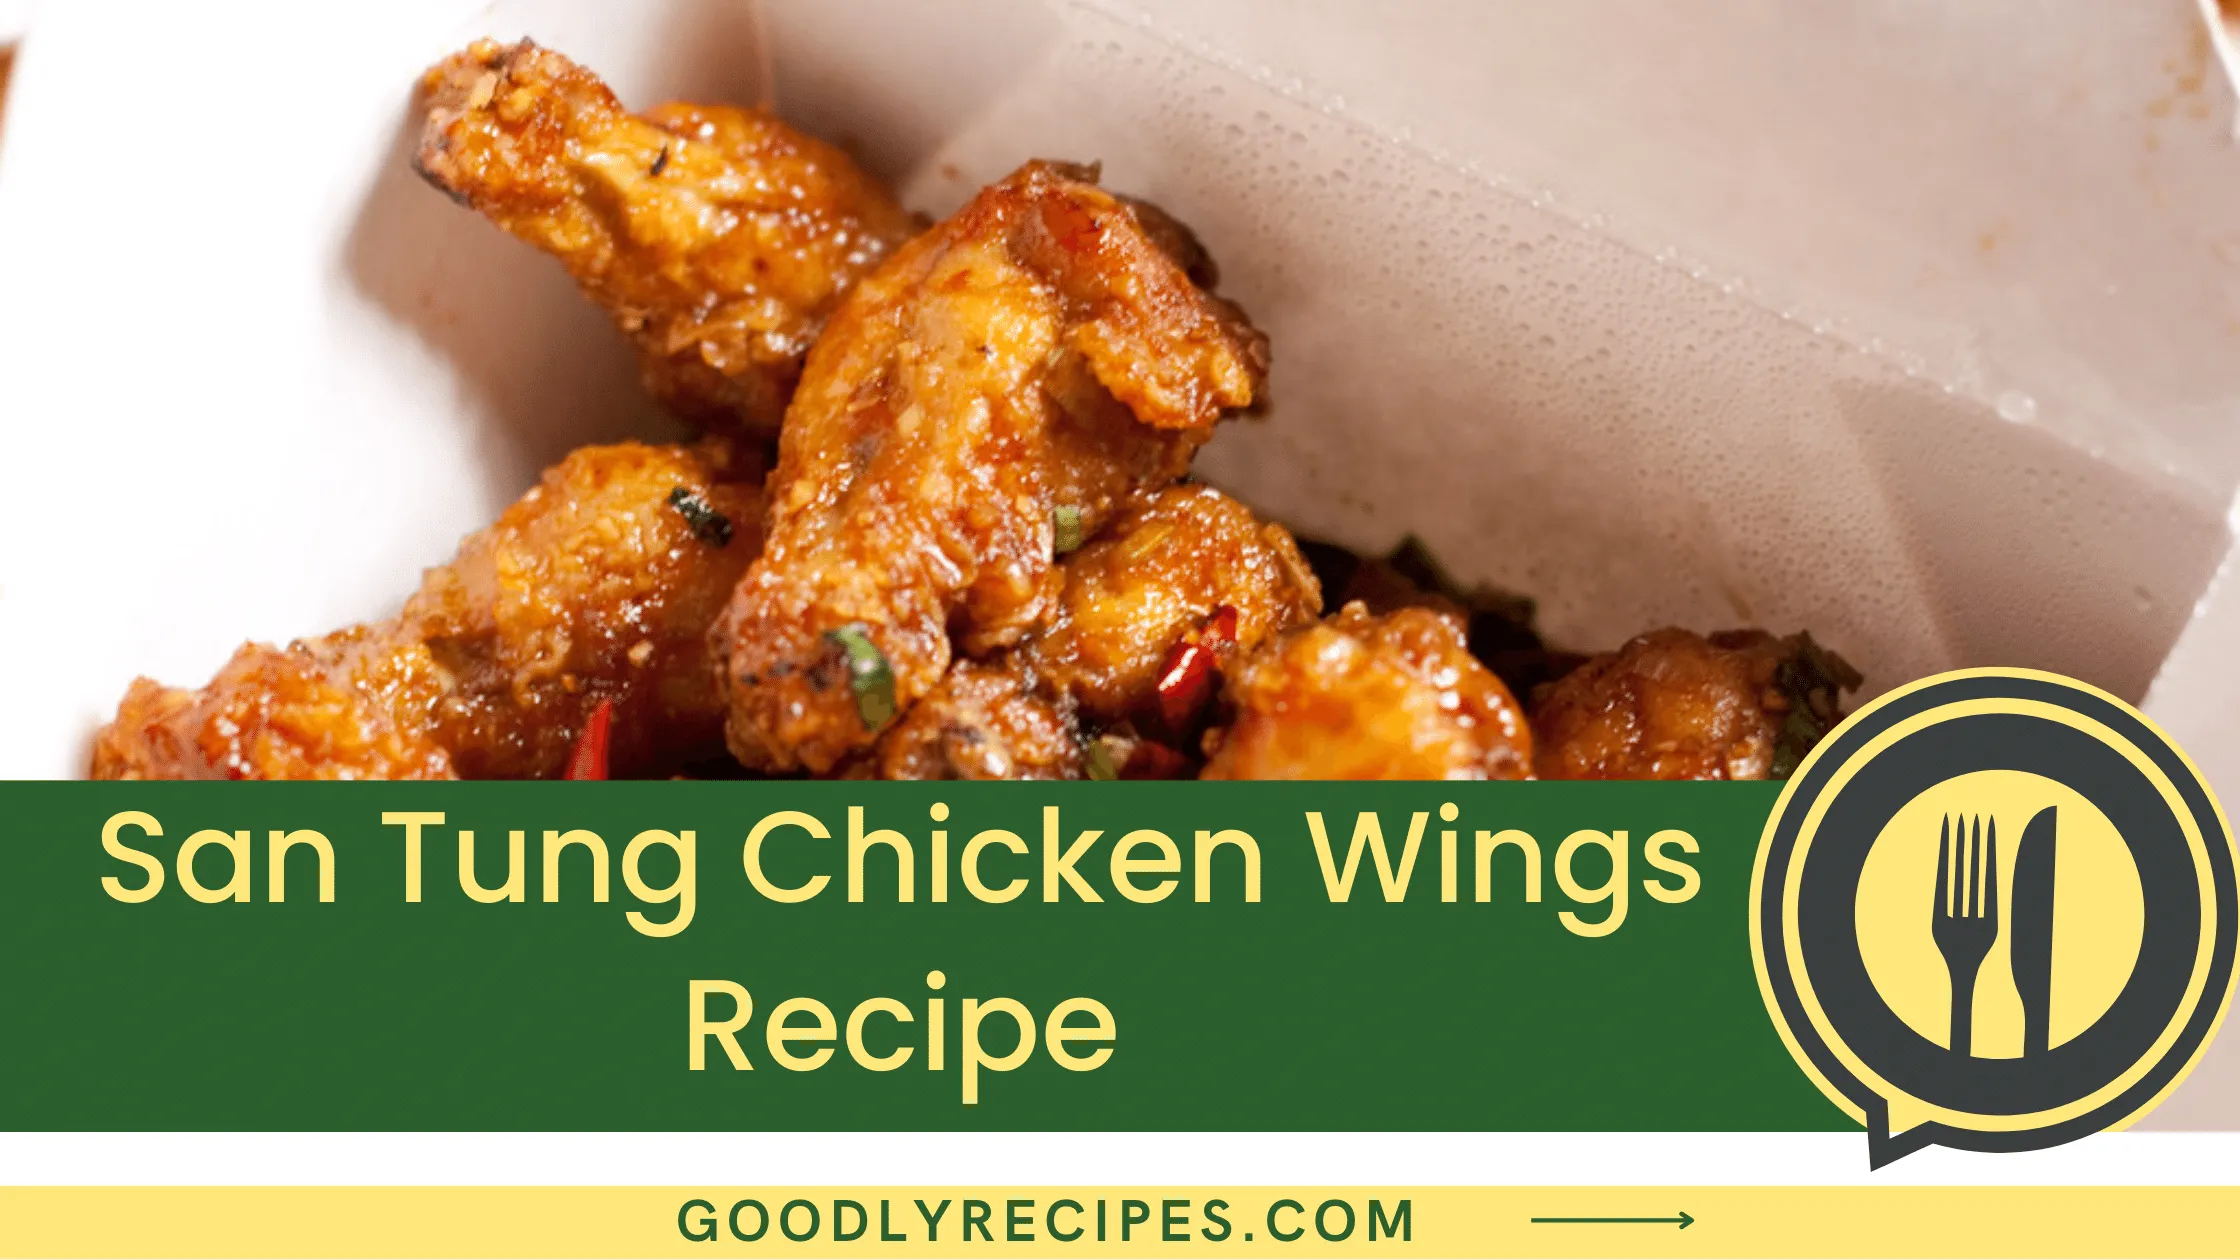 San Tung Chicken Wings Recipe - For Food Lovers